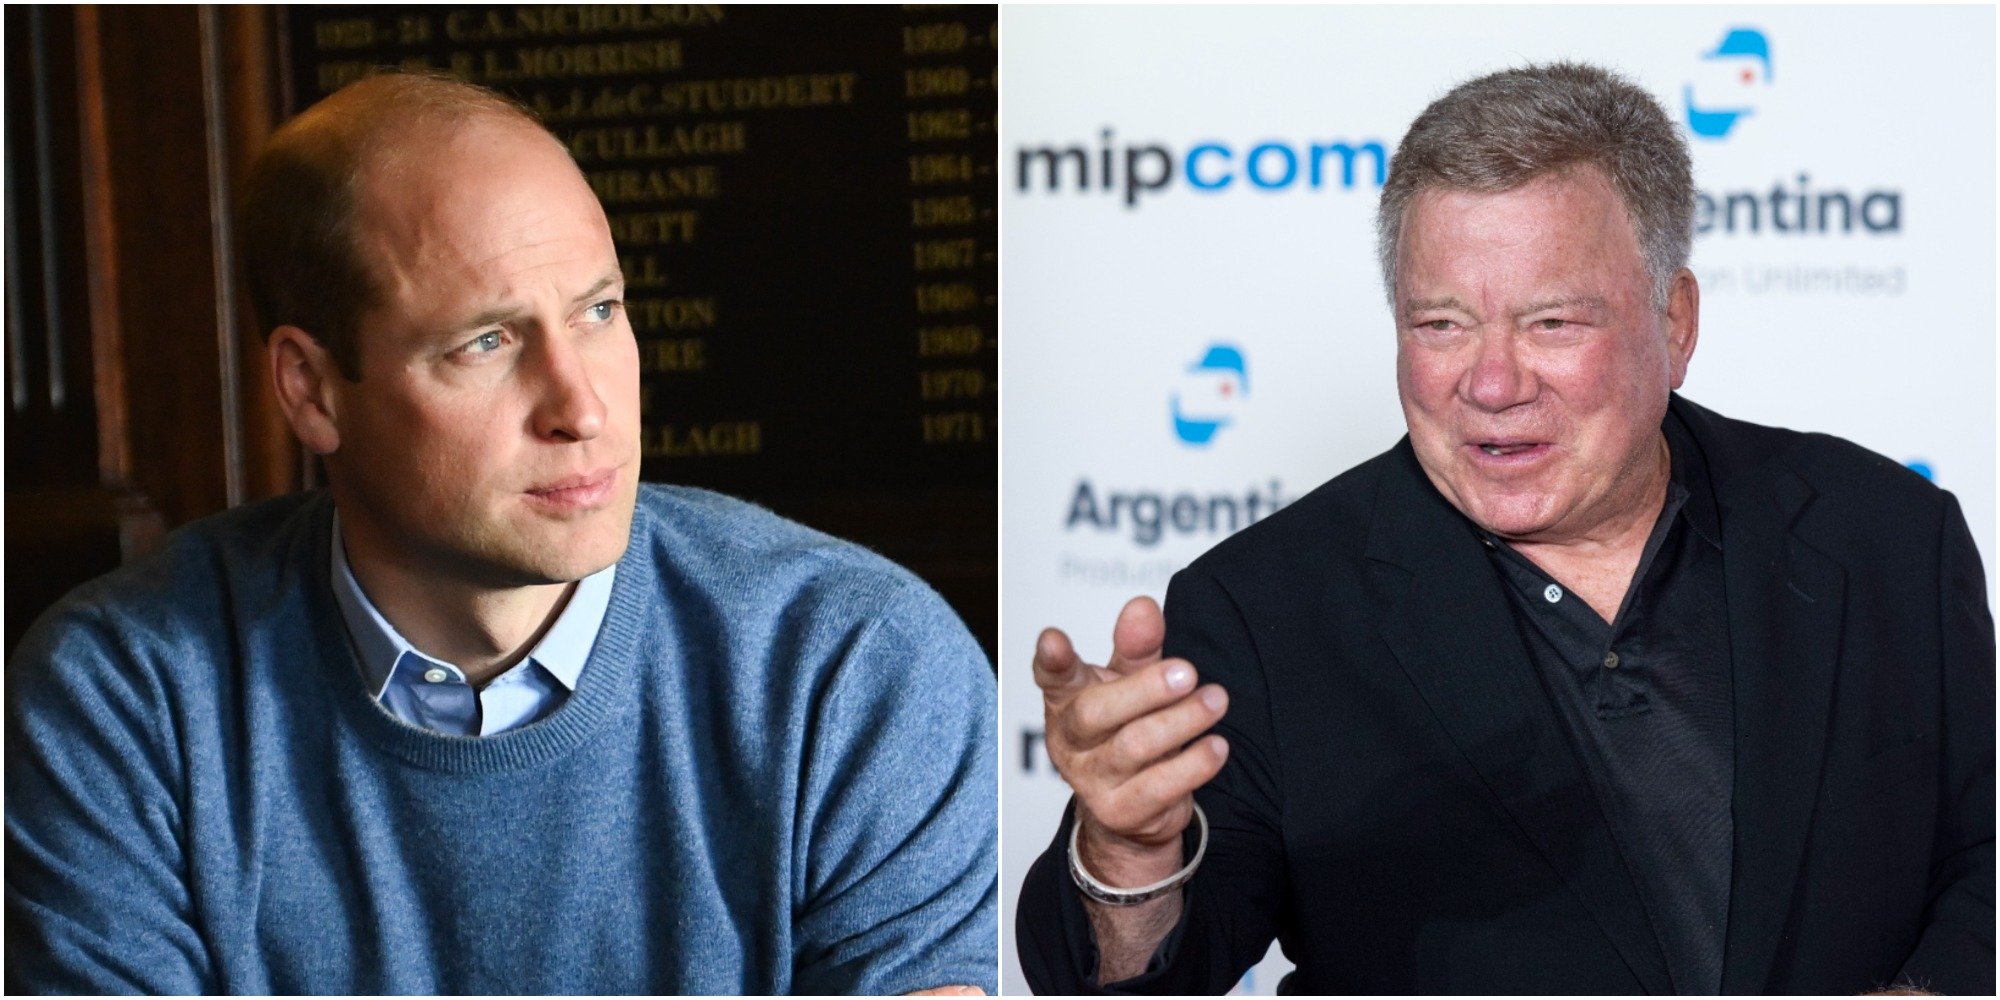 Prince William and William Shatner have differing opinions on space travel.